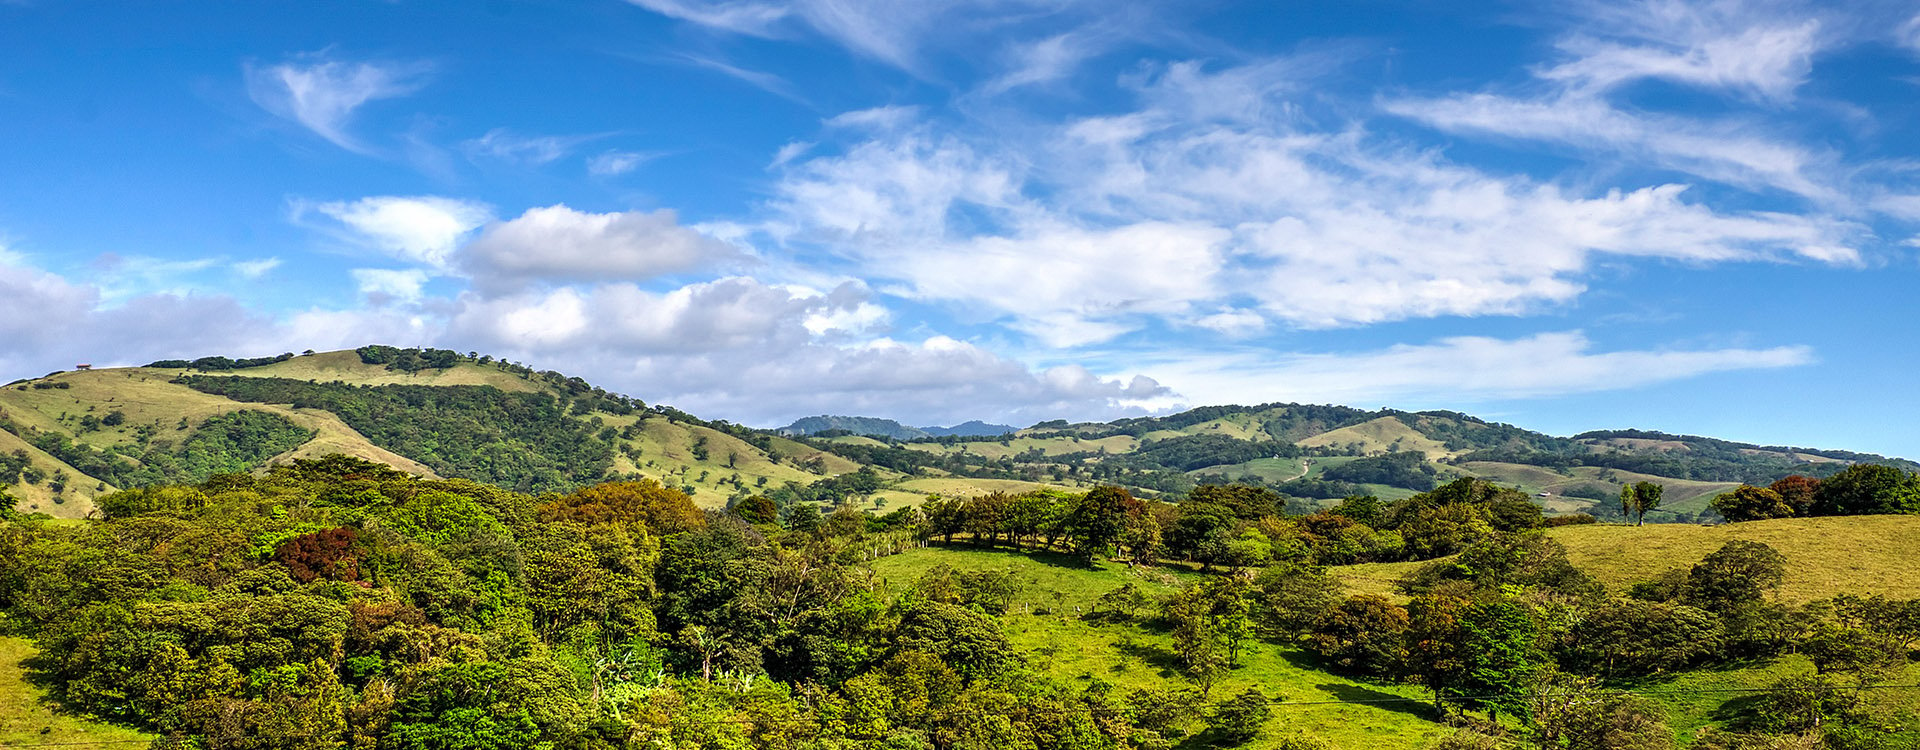 Perfect sunny day over the Monteverde hills and coffee plantations. Costa rica